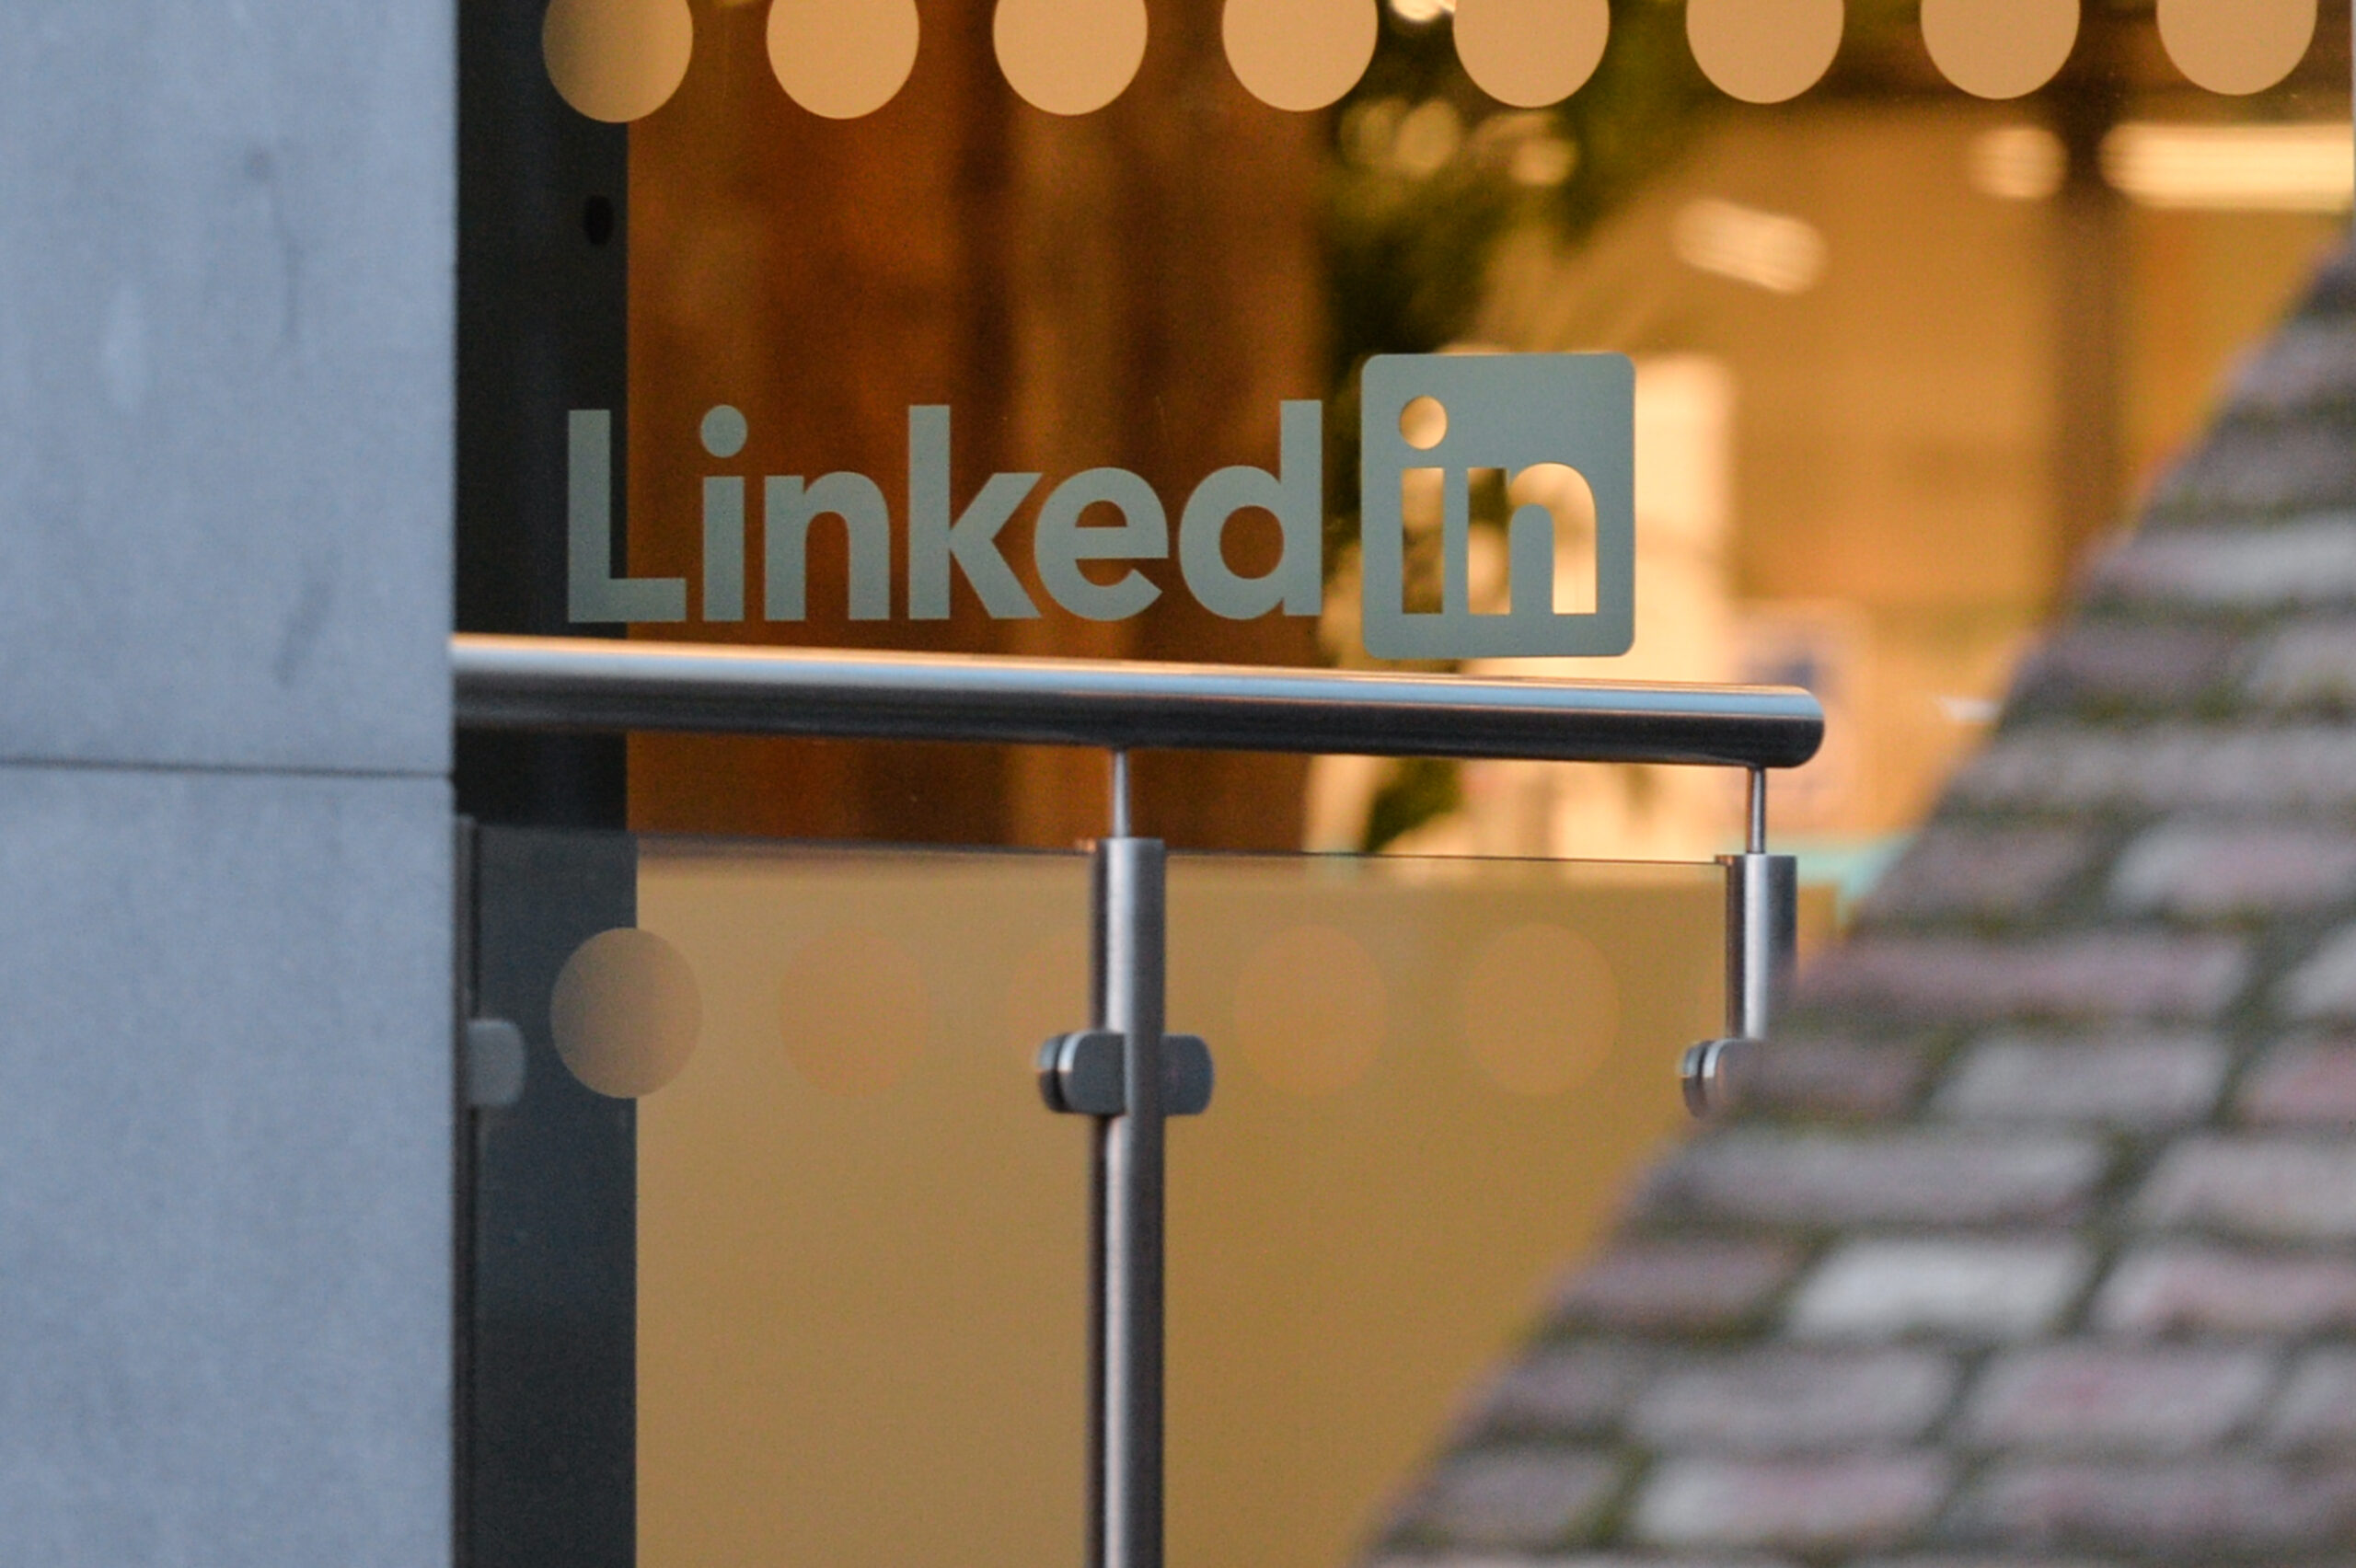 LinkedIn Announces Hundreds of Layoffs as Tech Sector Continues Slide